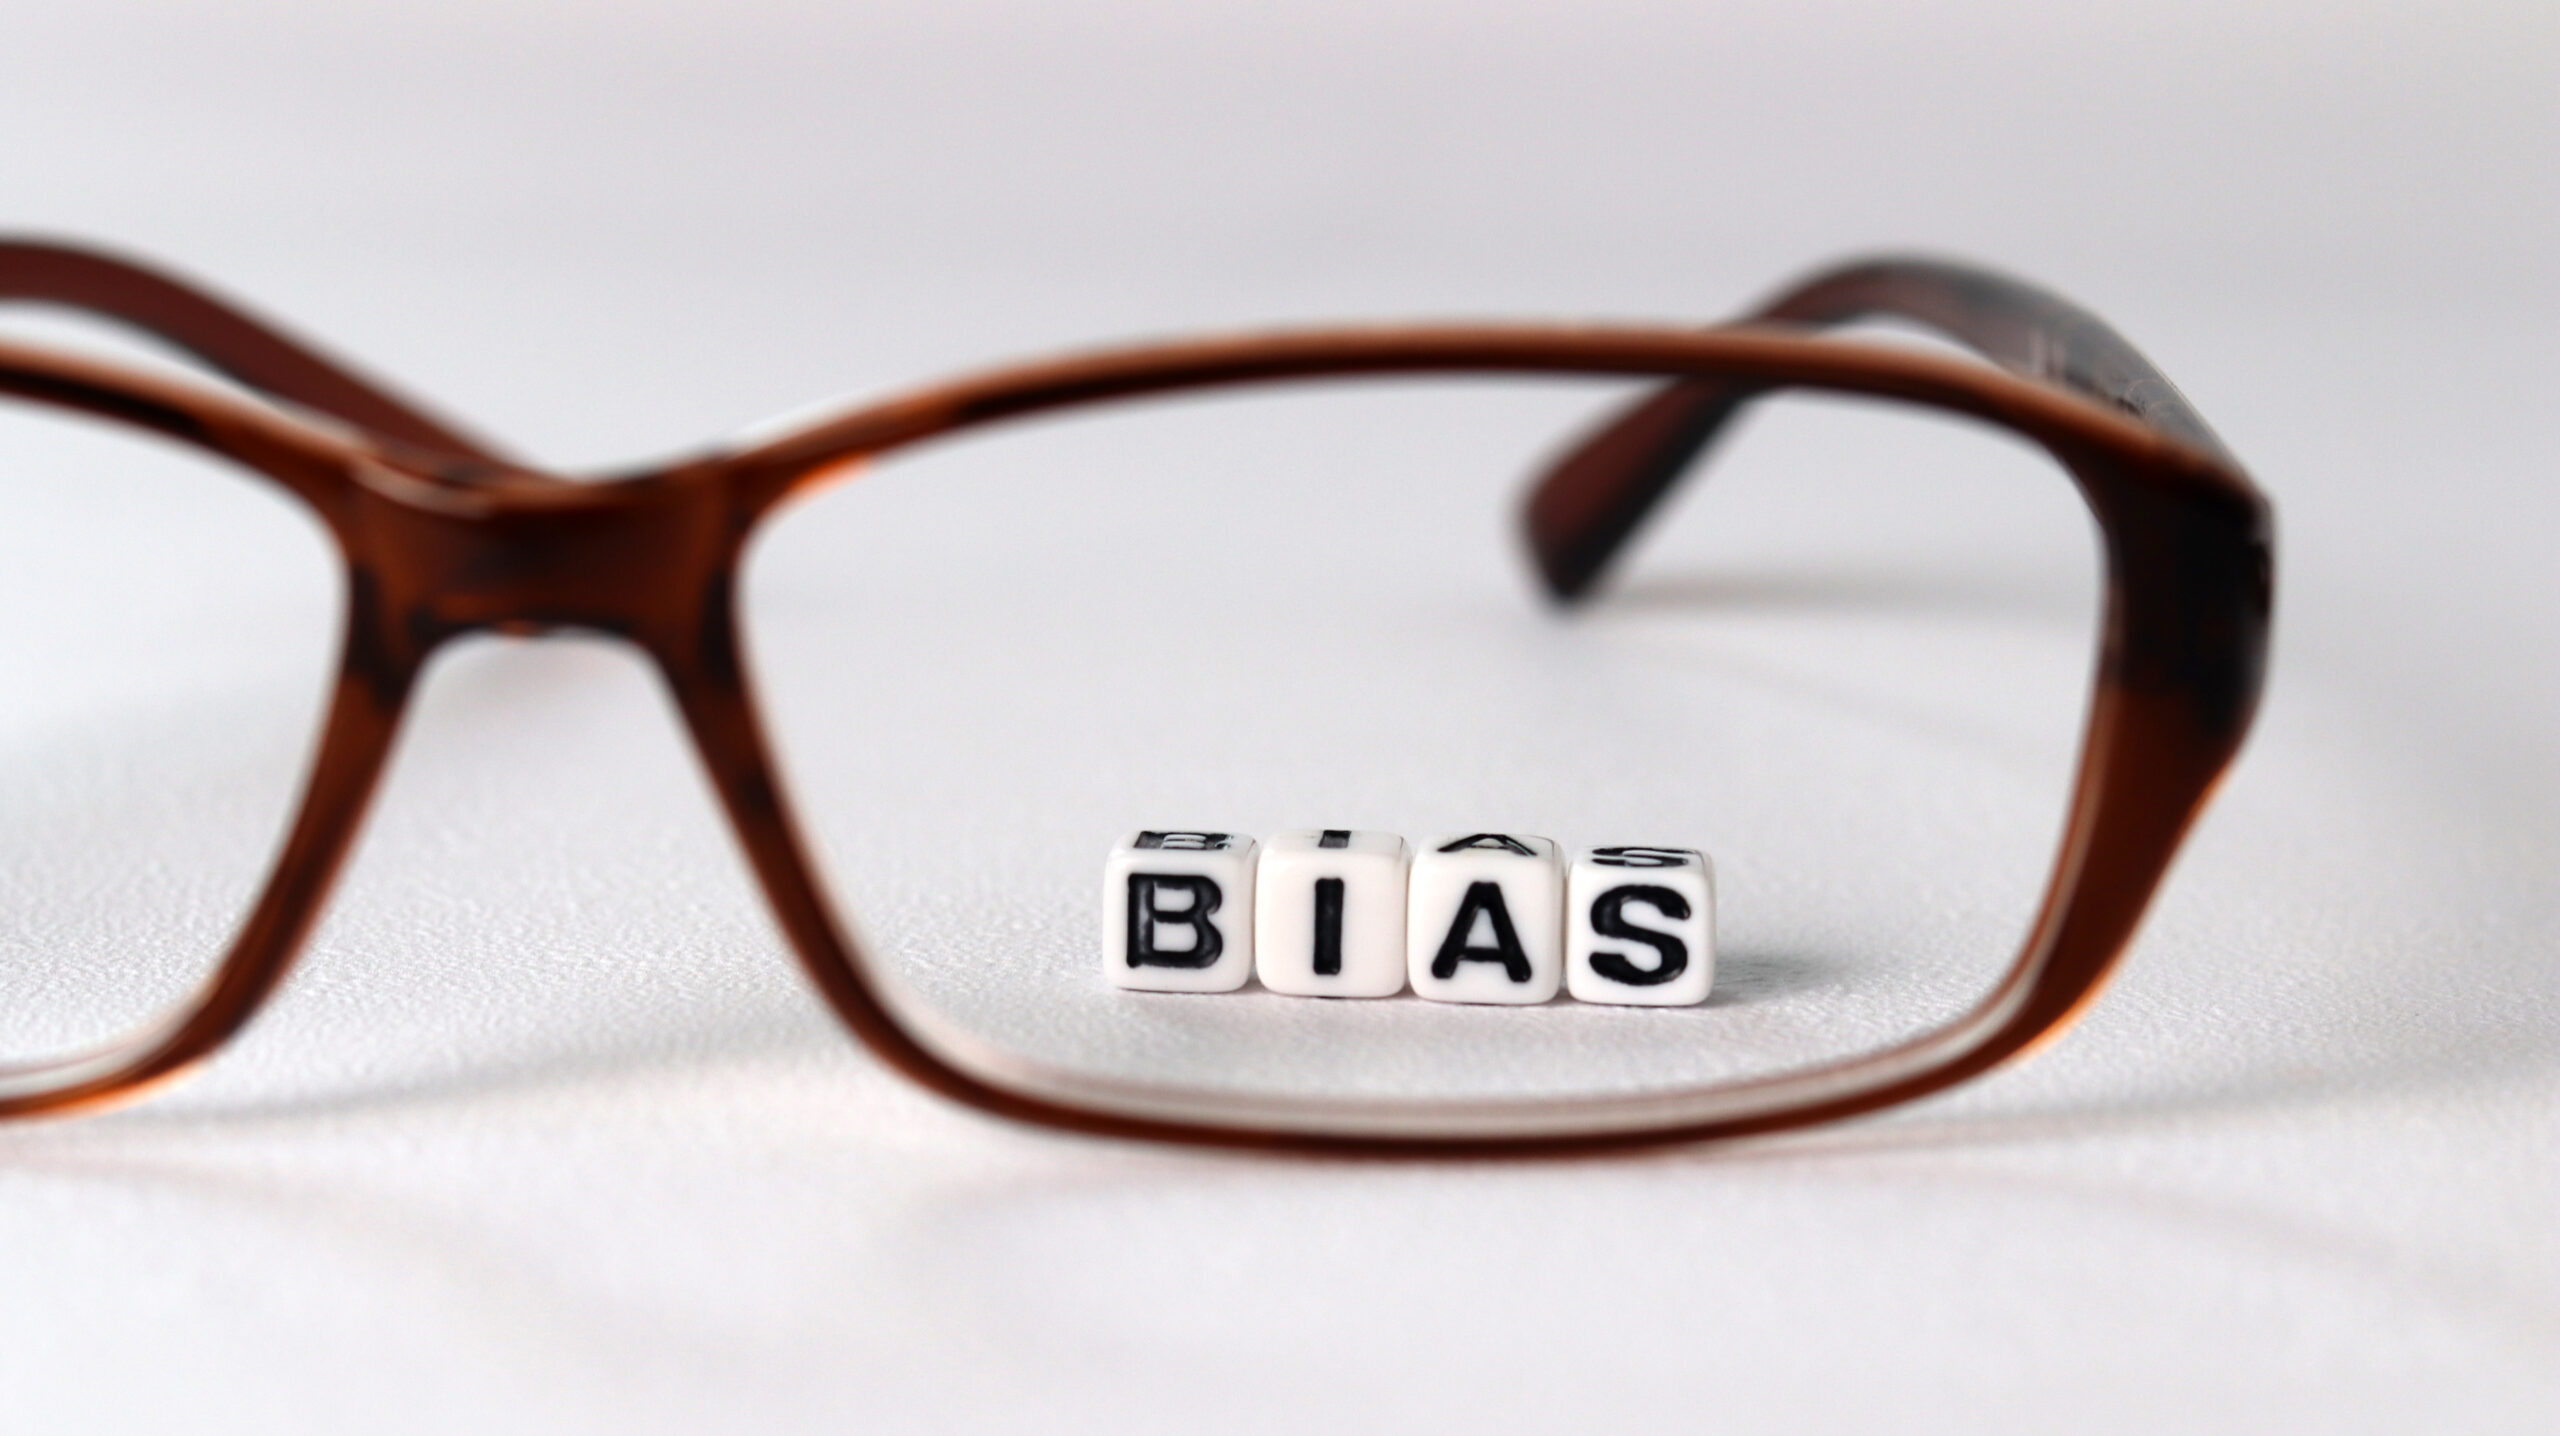 Stock photo of beads reading "bias" behind a pair of glasses.